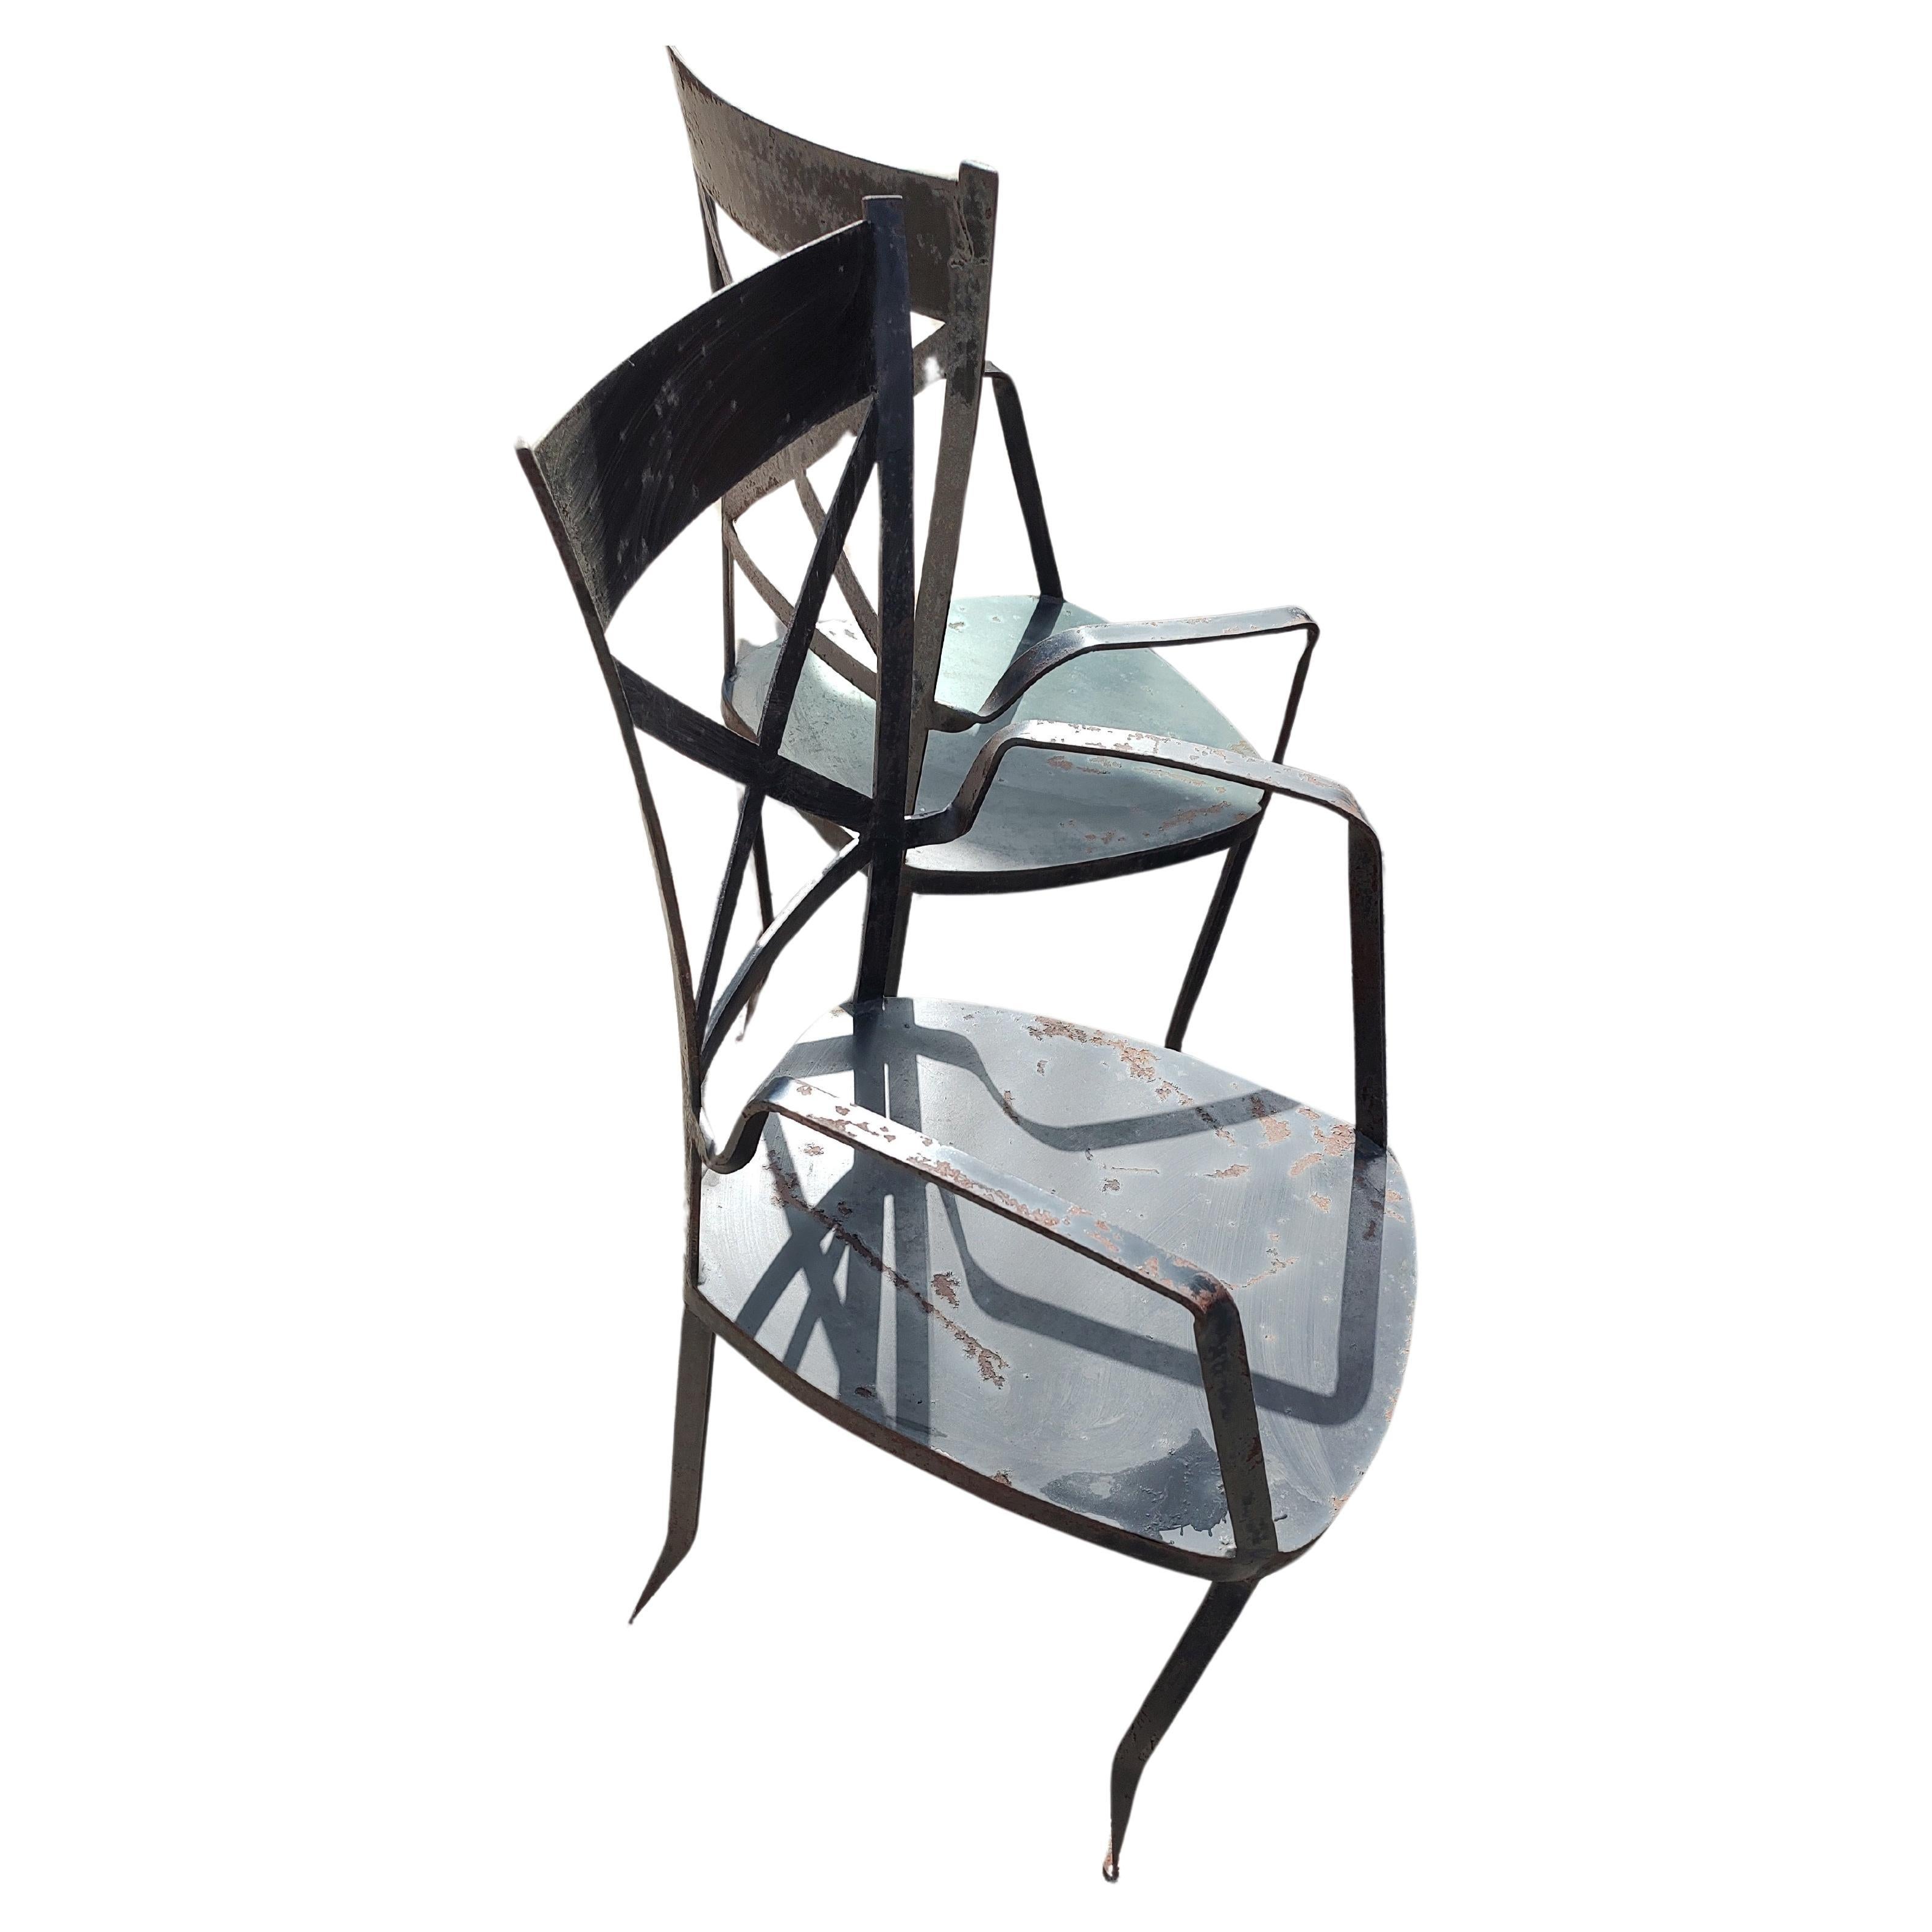 Hand-Crafted Pair of Heavy Duty High Quality Iron Modern Sculptural Garden Patio Armchairs   For Sale